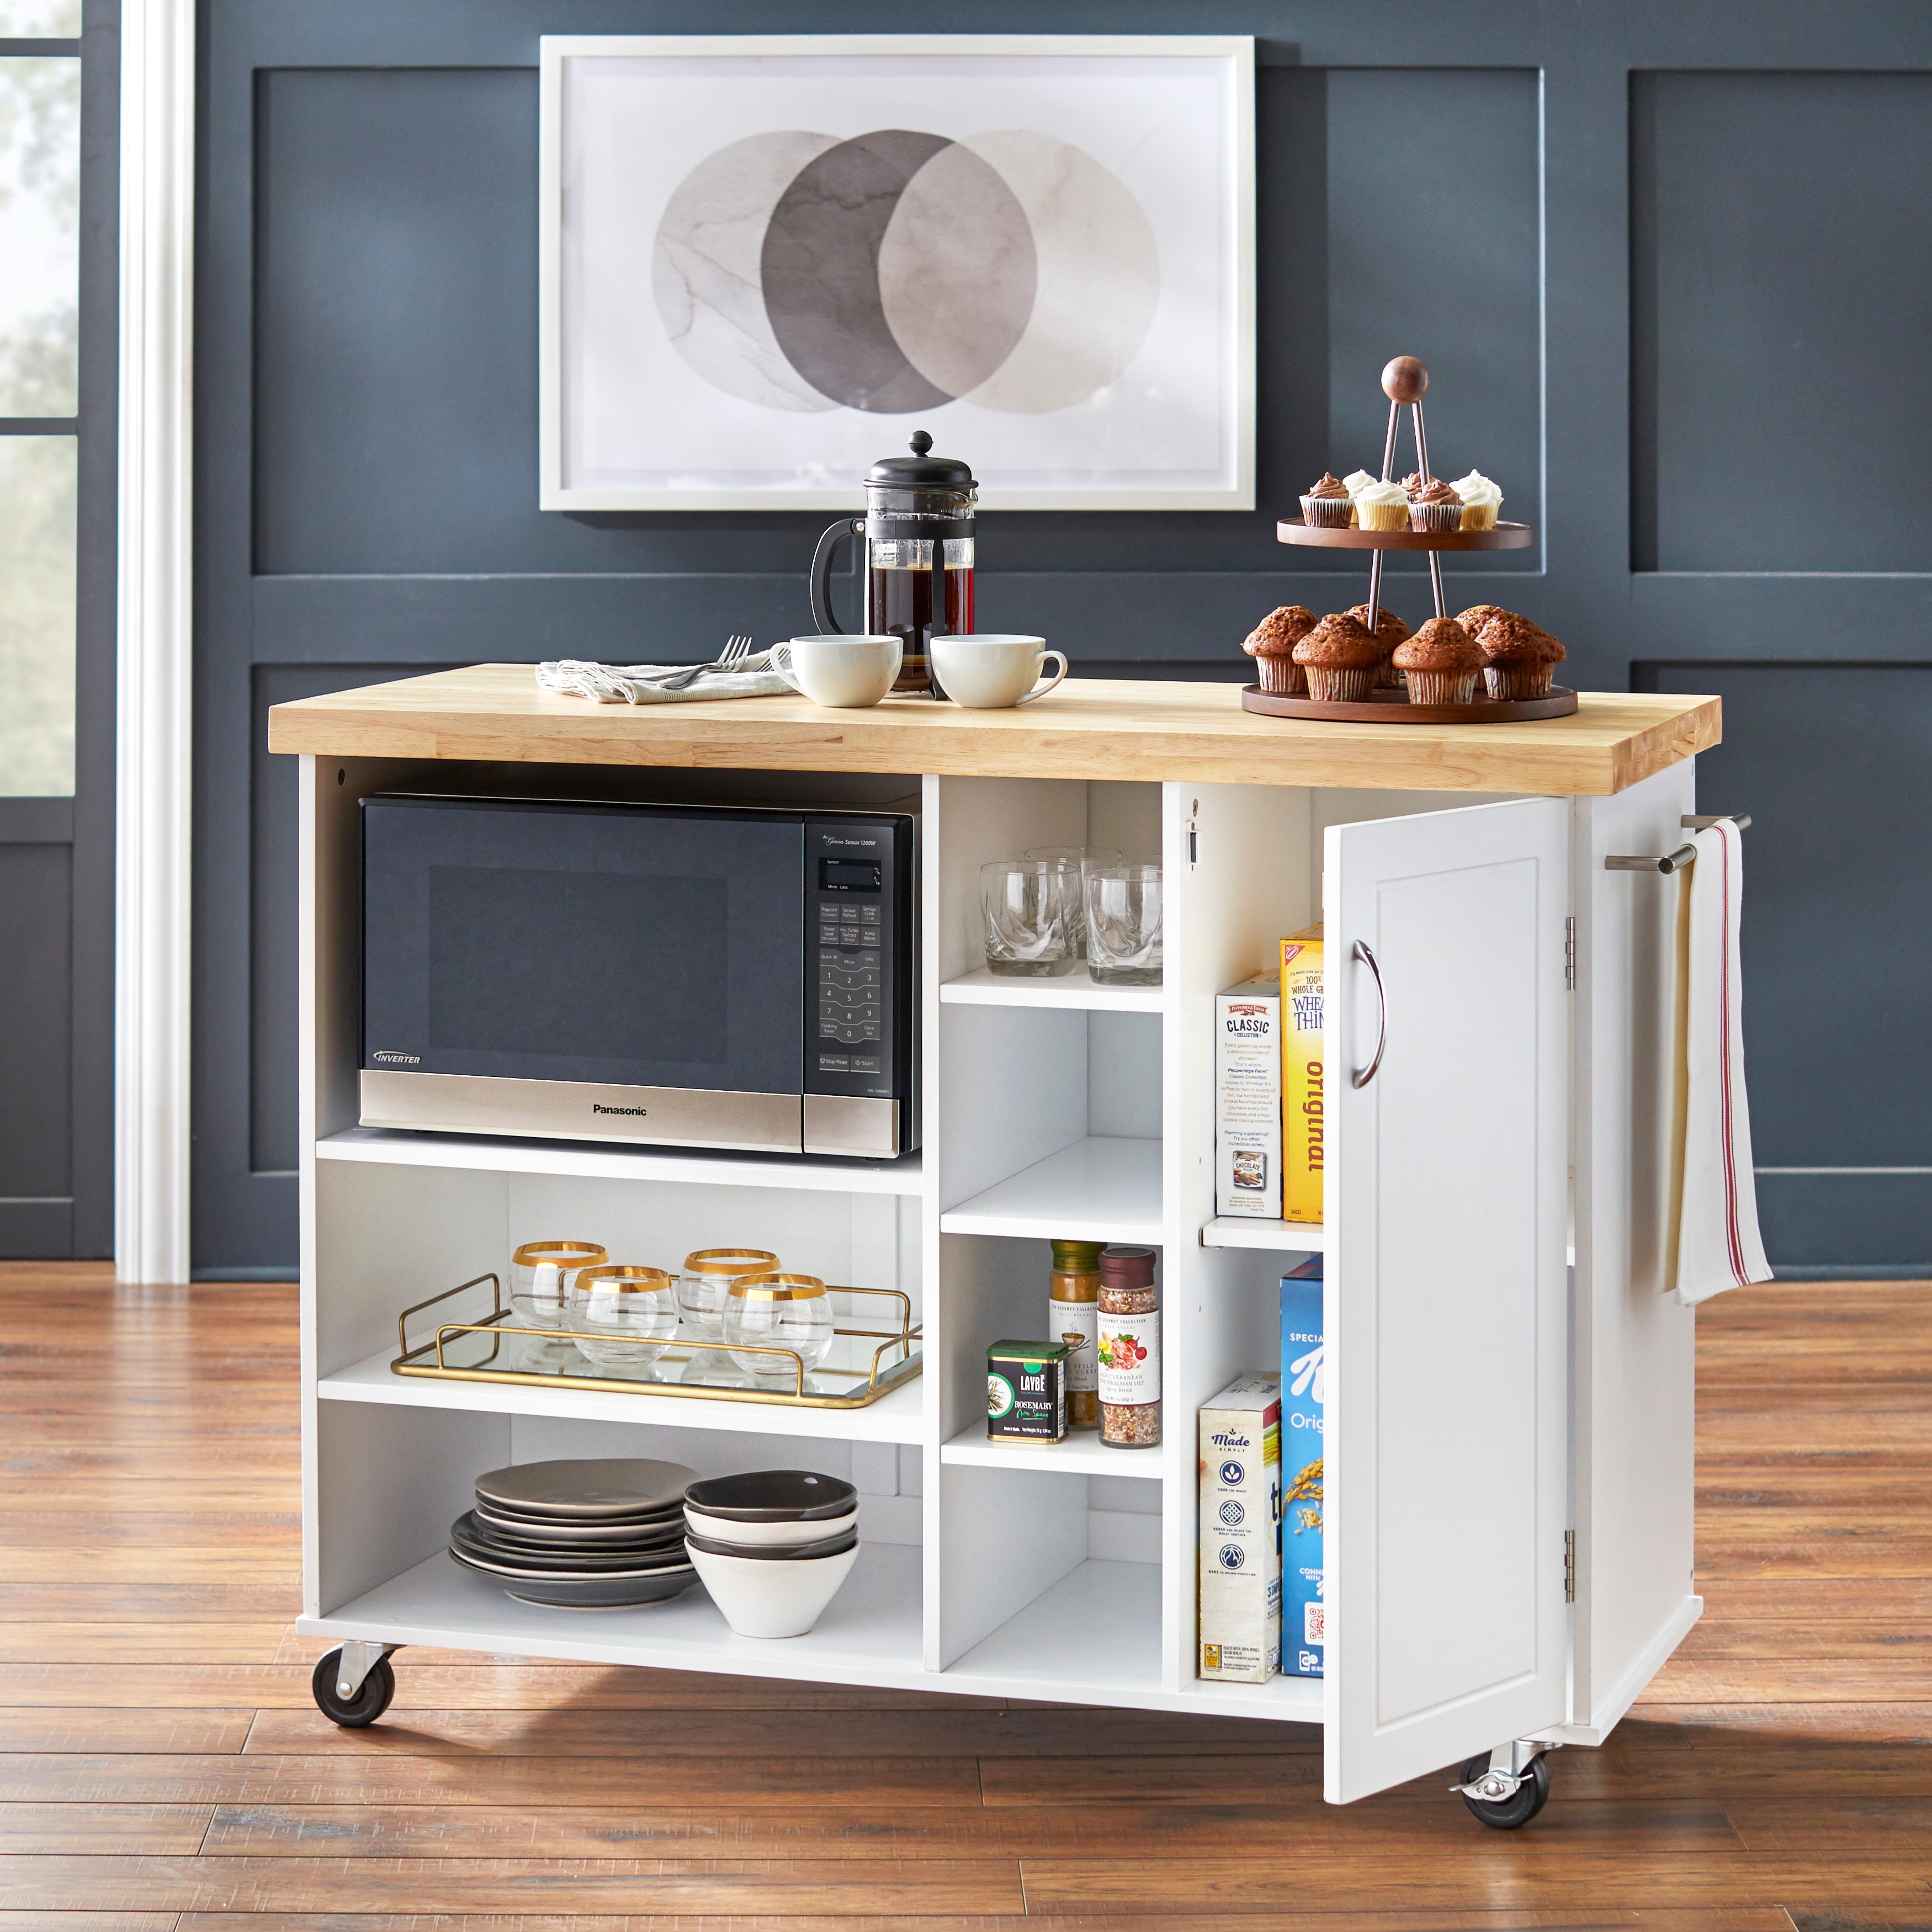 Simple utilitarian kitchen cart for extra counter space : r